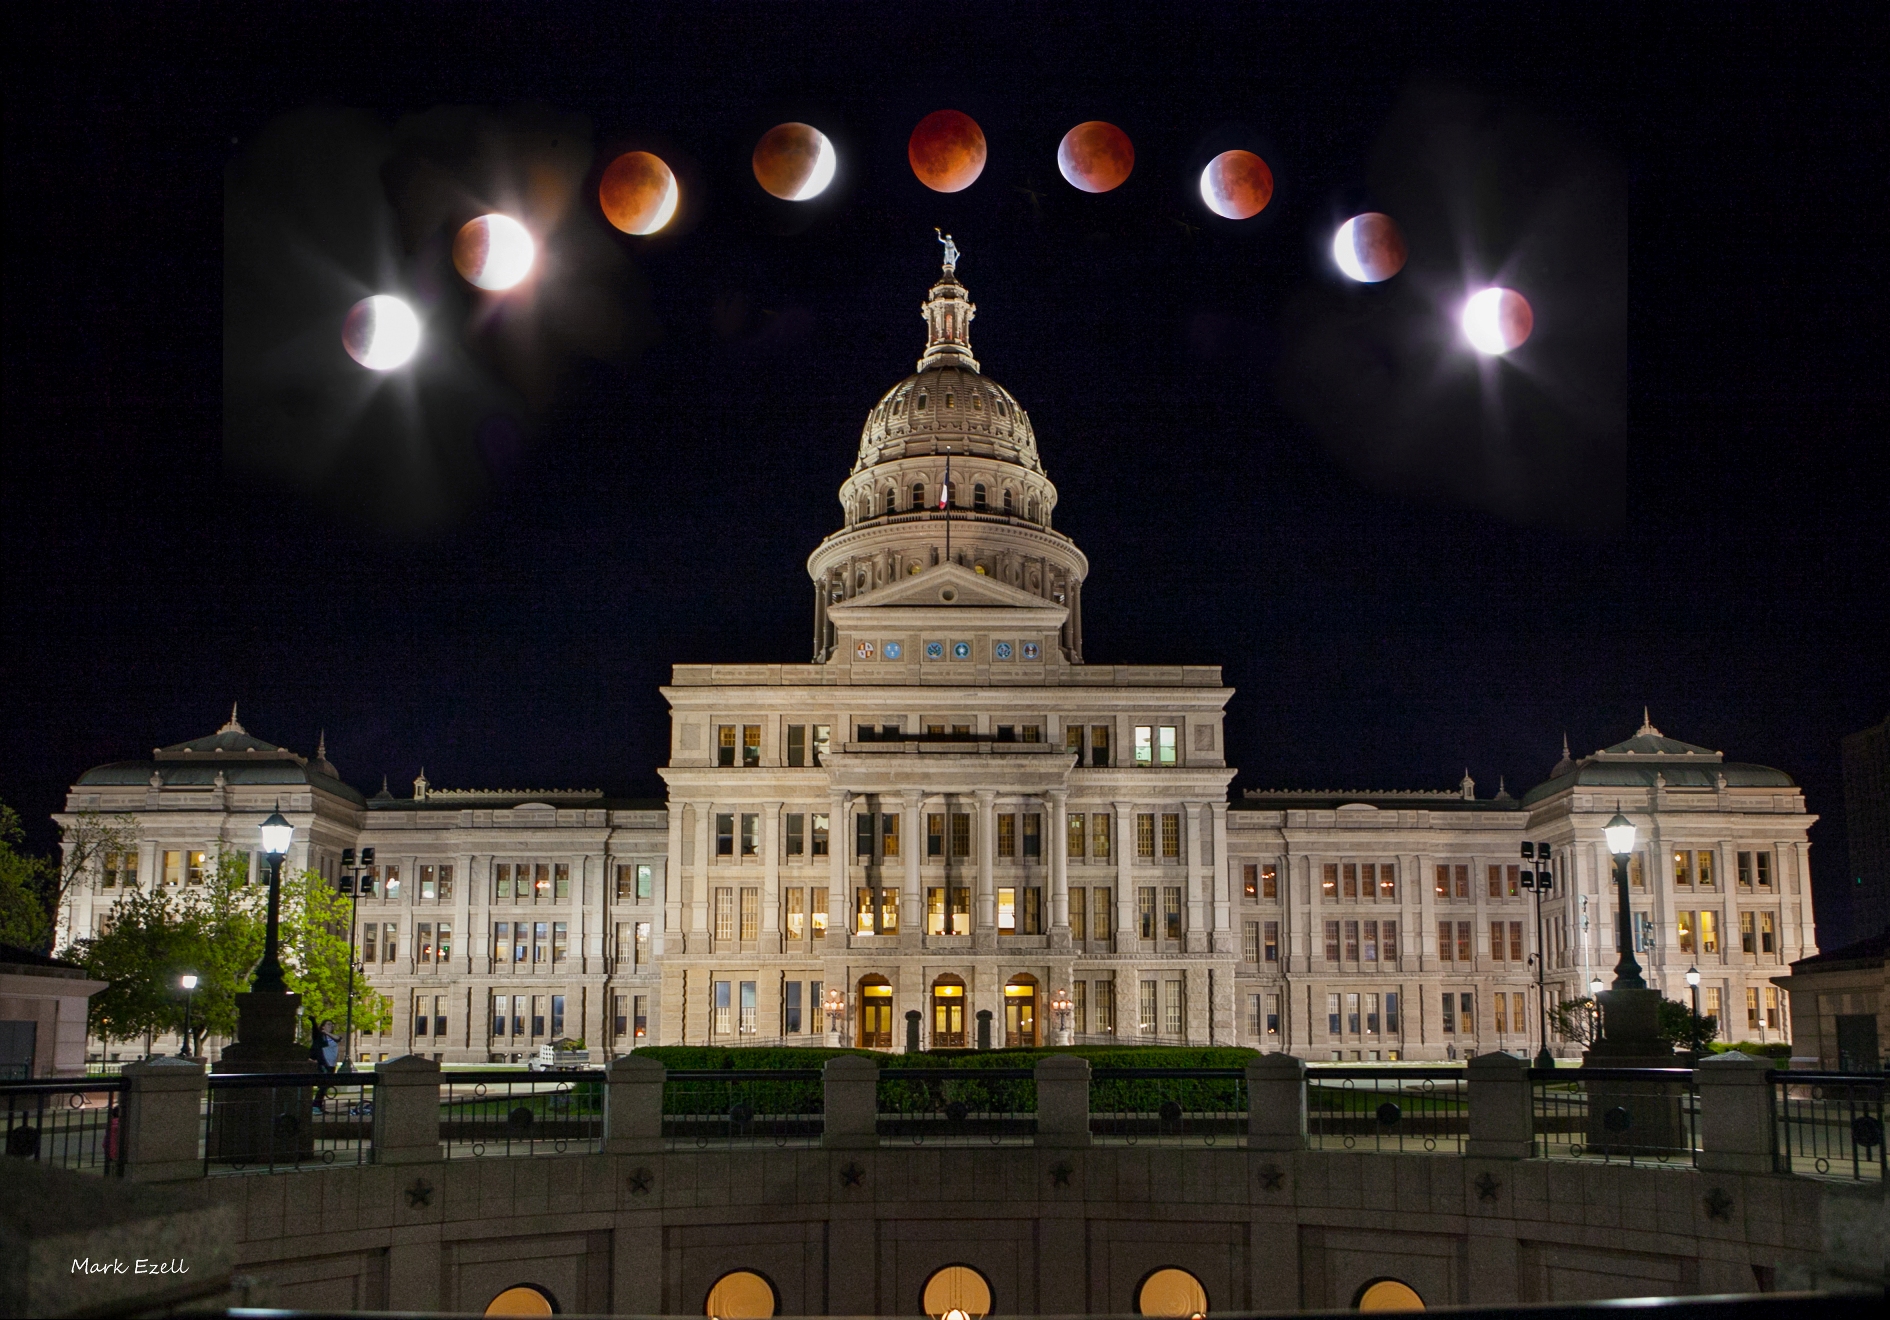 Blood Moon Lunar Eclipse Phases Over Texas Capitol Building (Photo